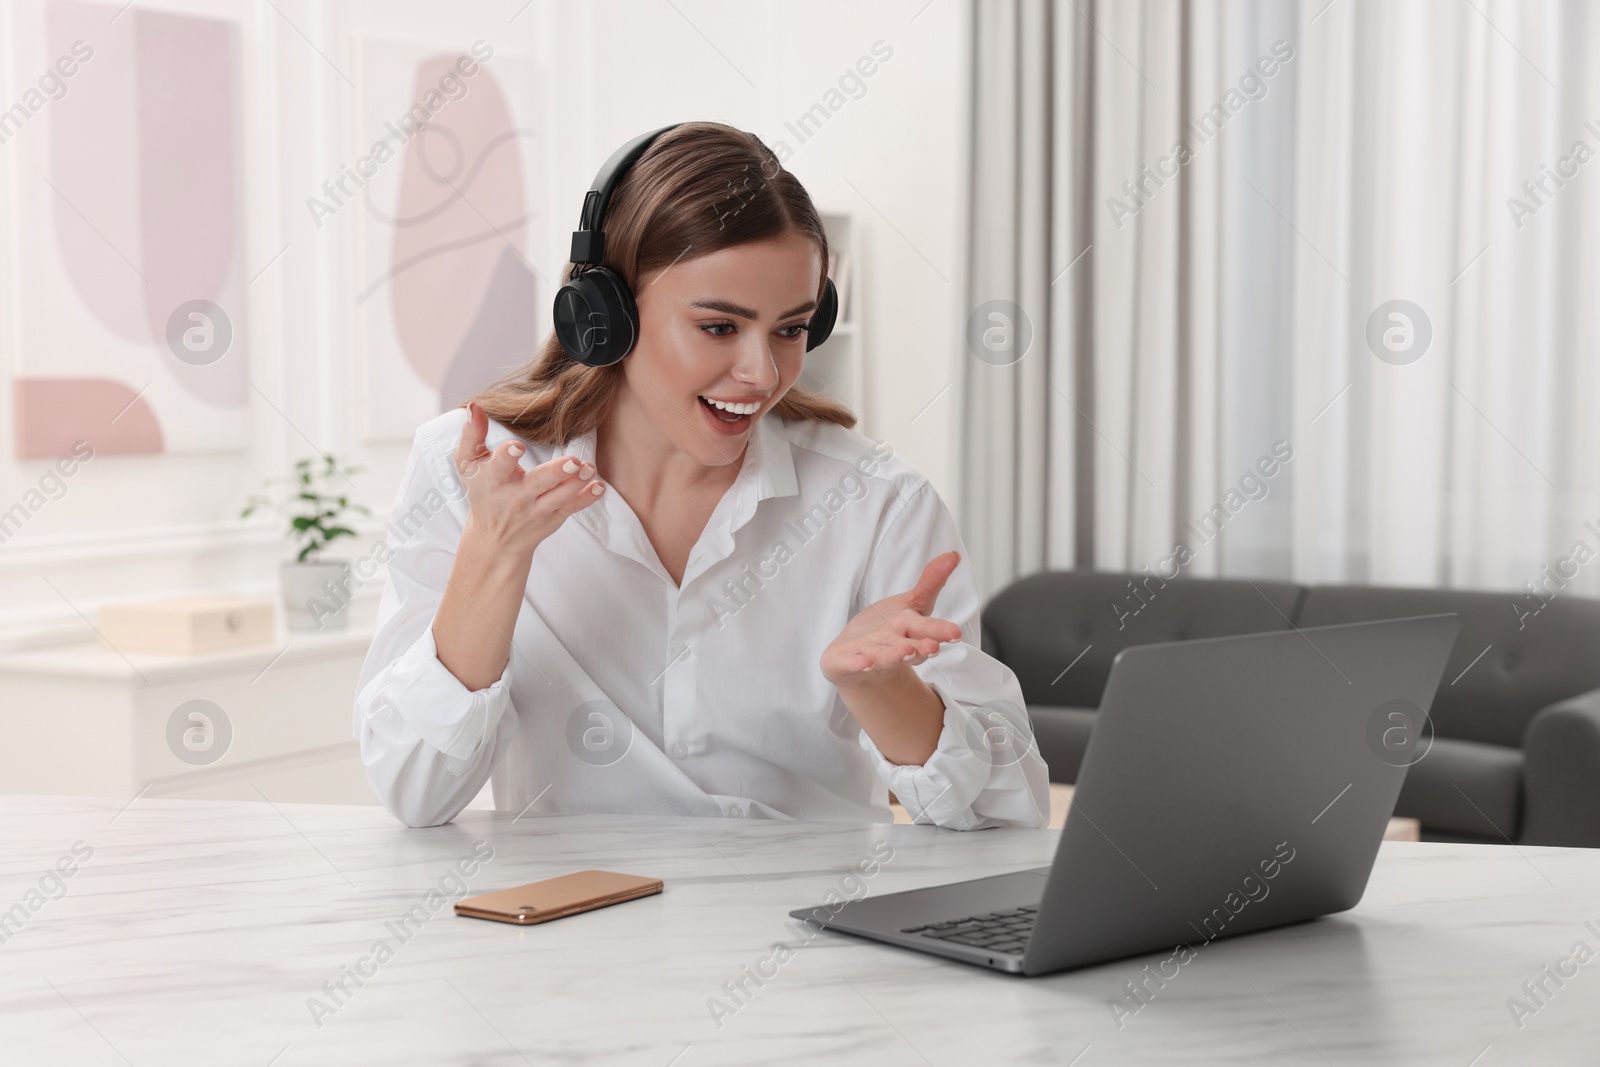 Photo of Happy woman with headphones having video chat via laptop at white table in room